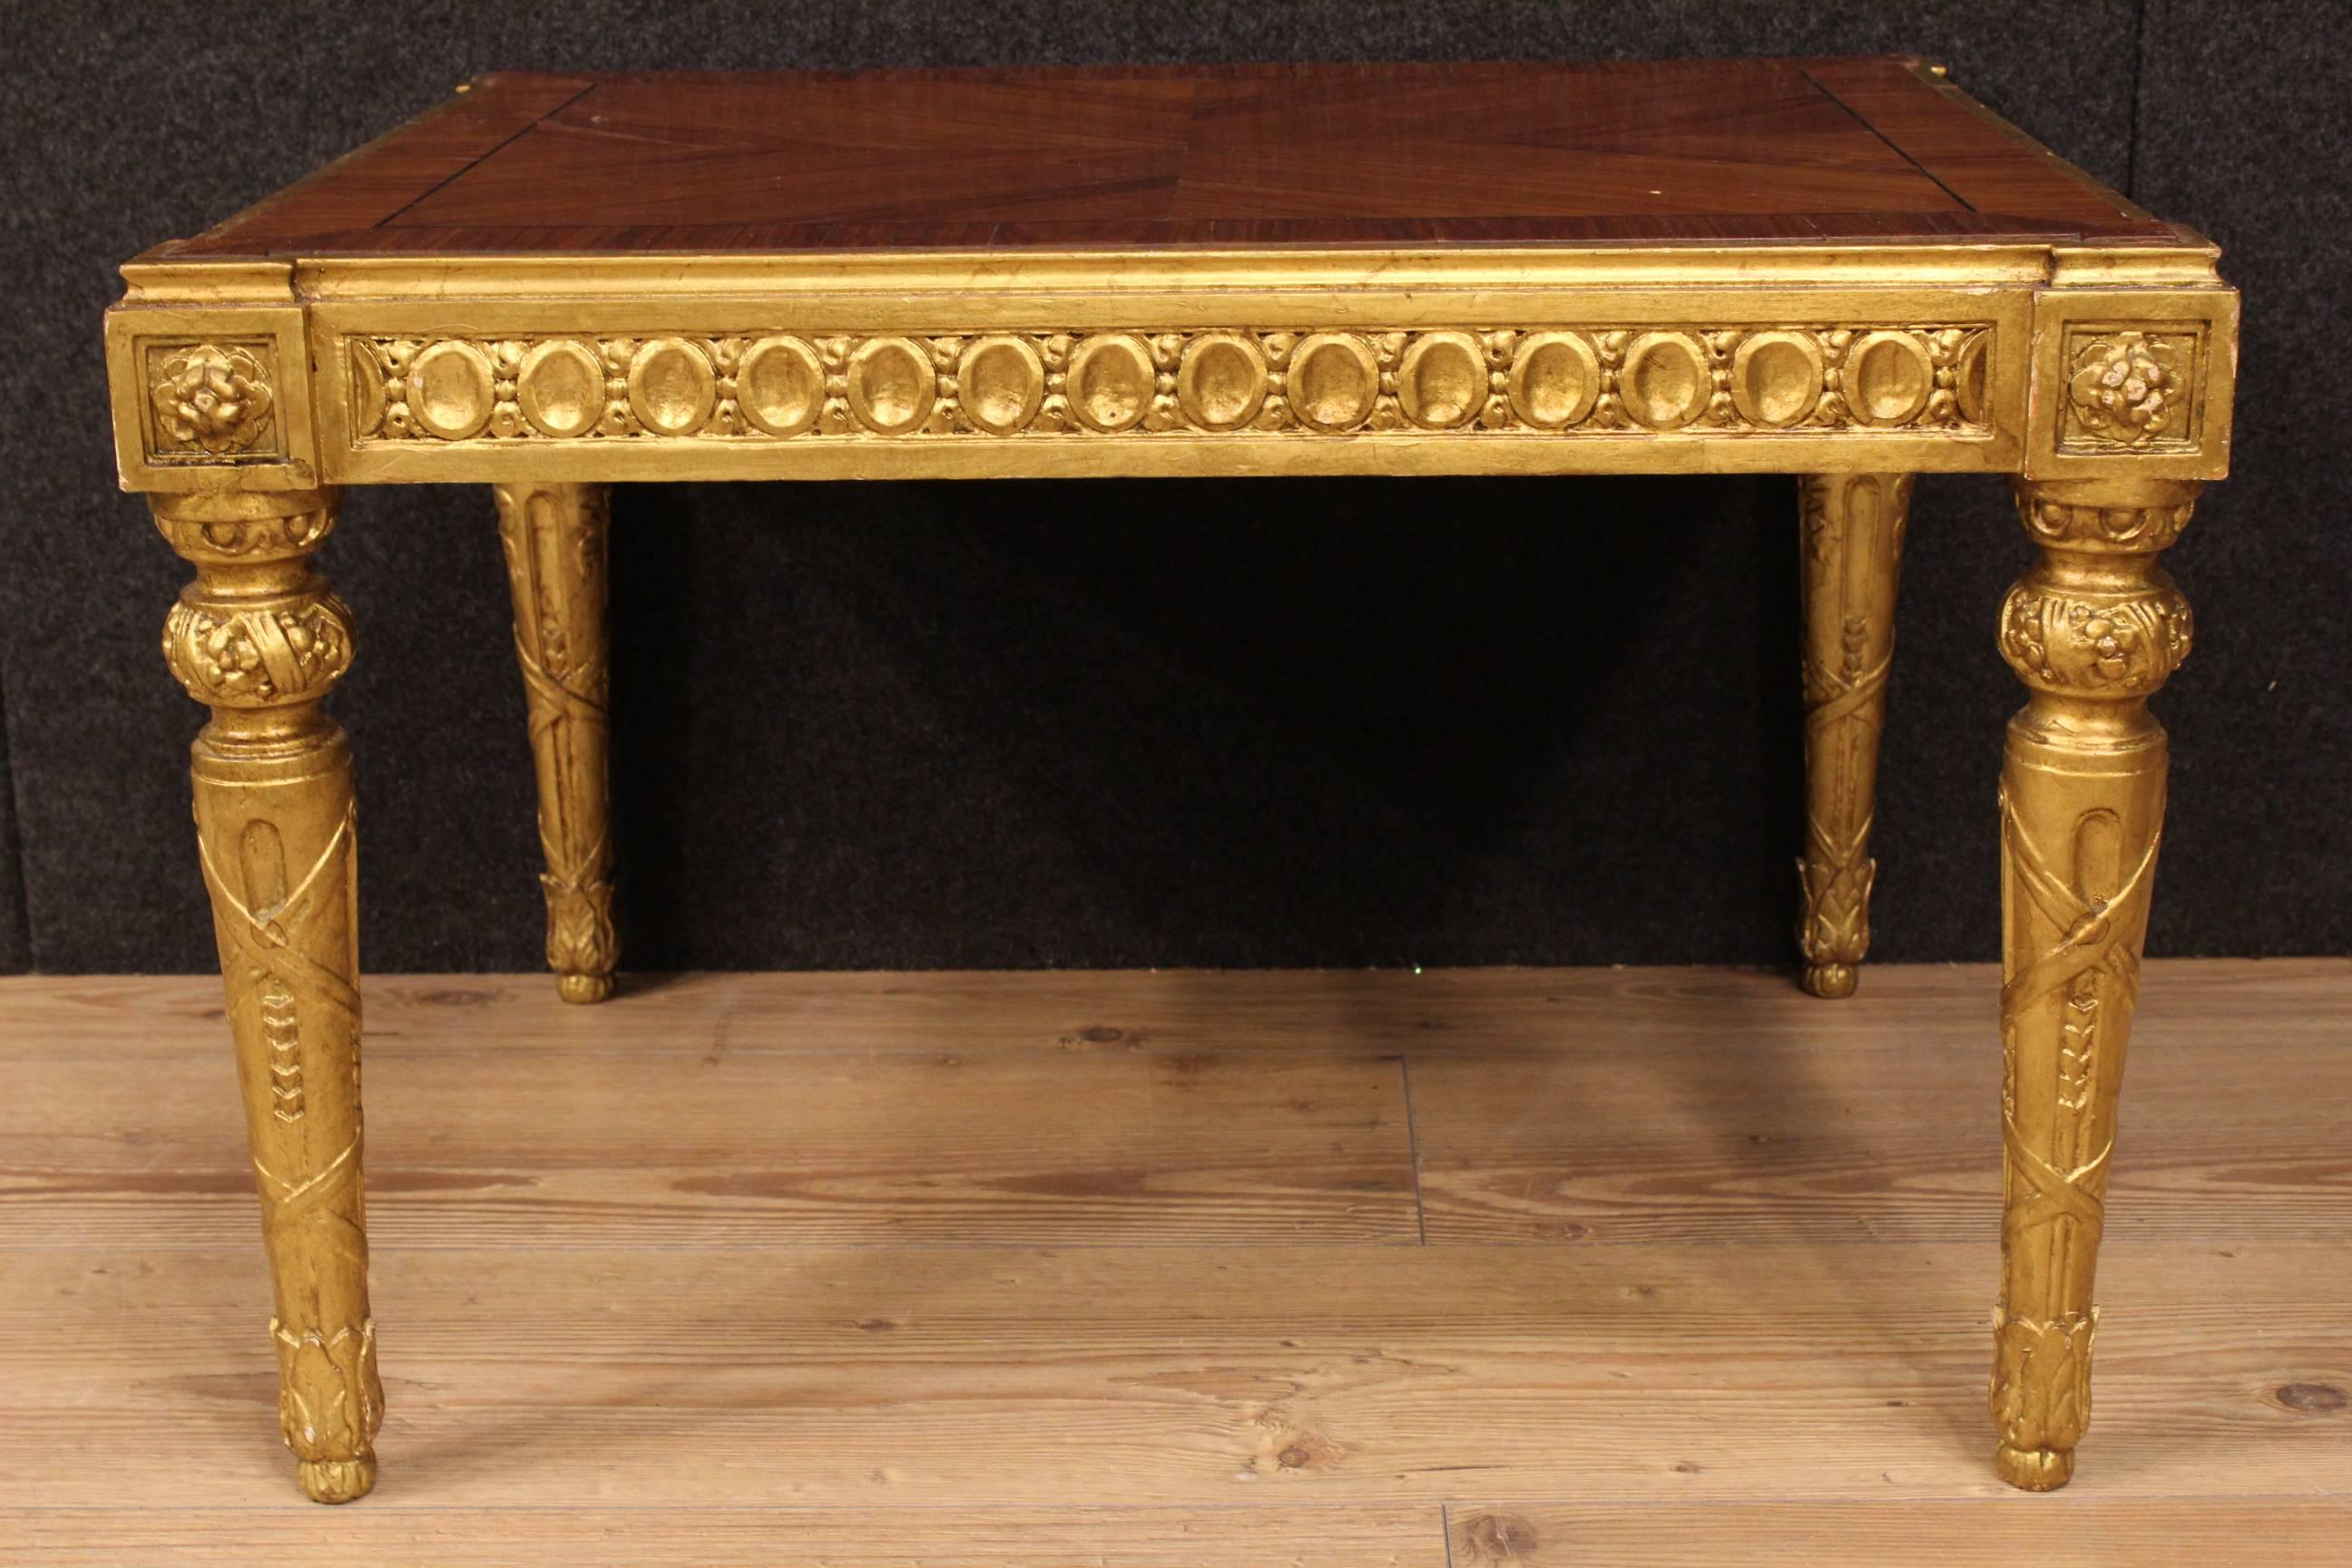 Rosewood 20th Century Pair of Italian Golden Coffee Table in Louis XVI Style